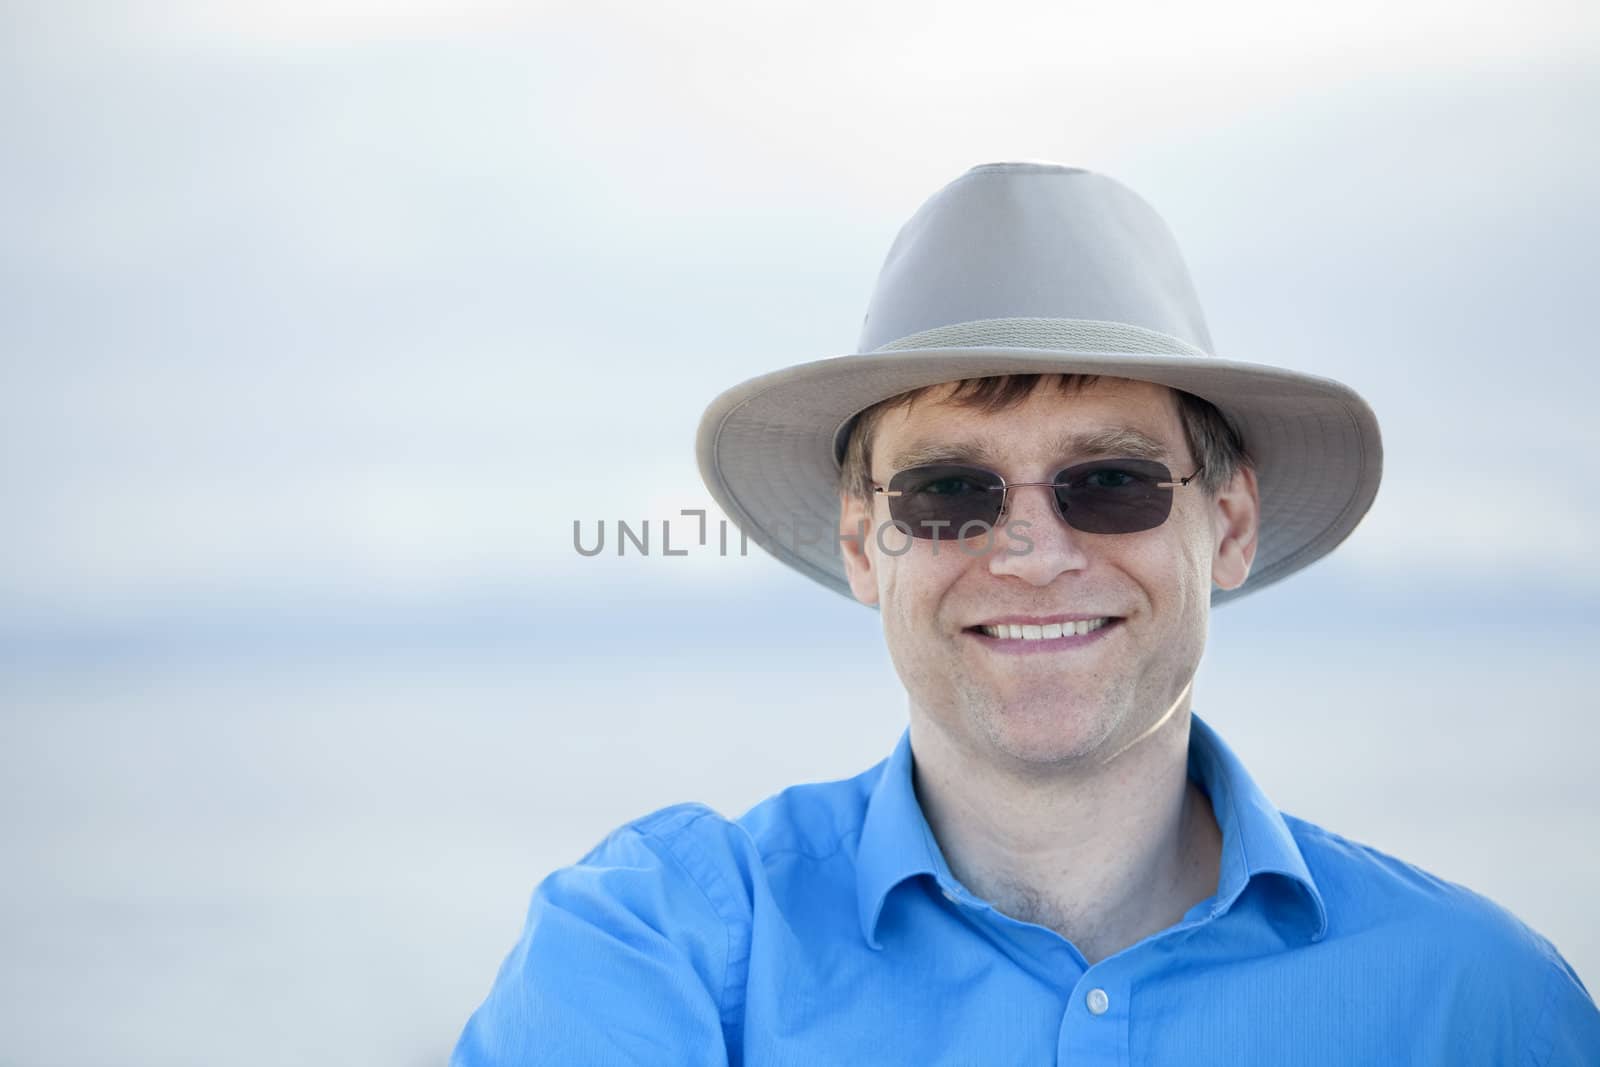 Handsome man wearing hat and sunglasses in early forties with blurred water background